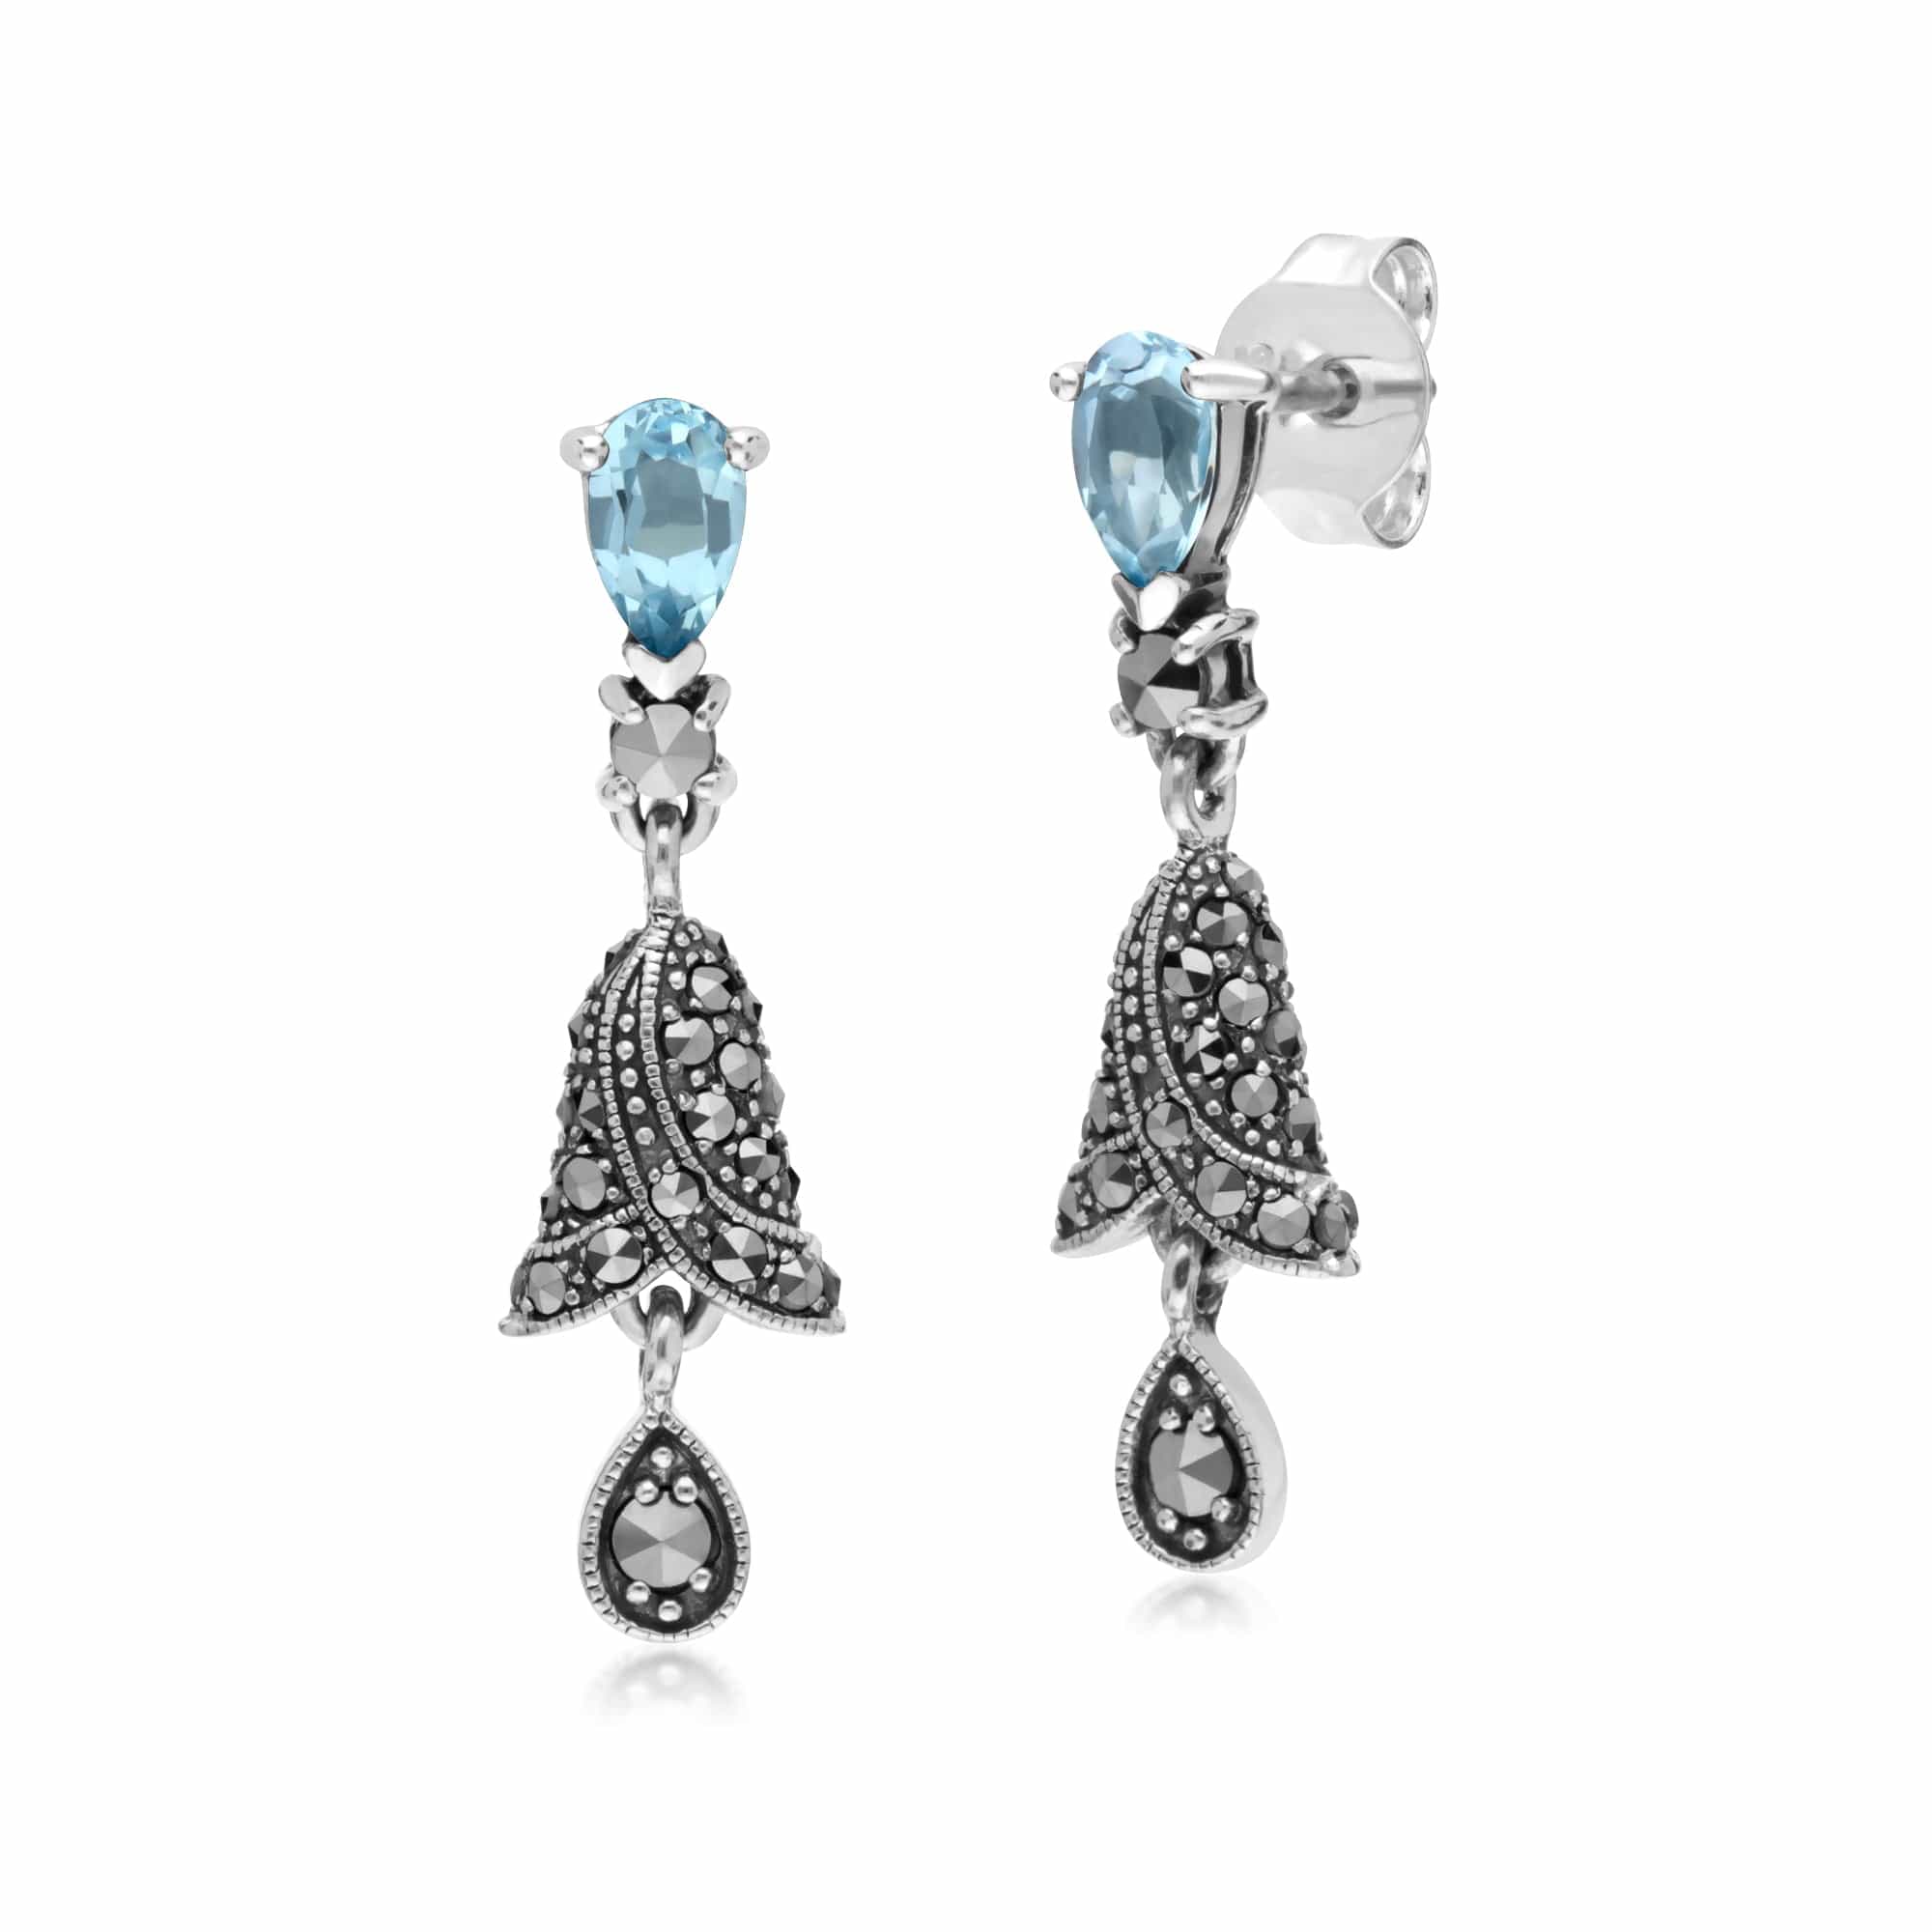 214E873101925 Art Nouveau Style Blue Topaz and Marcasite Bell Drop Earrings in 925 Silver 1